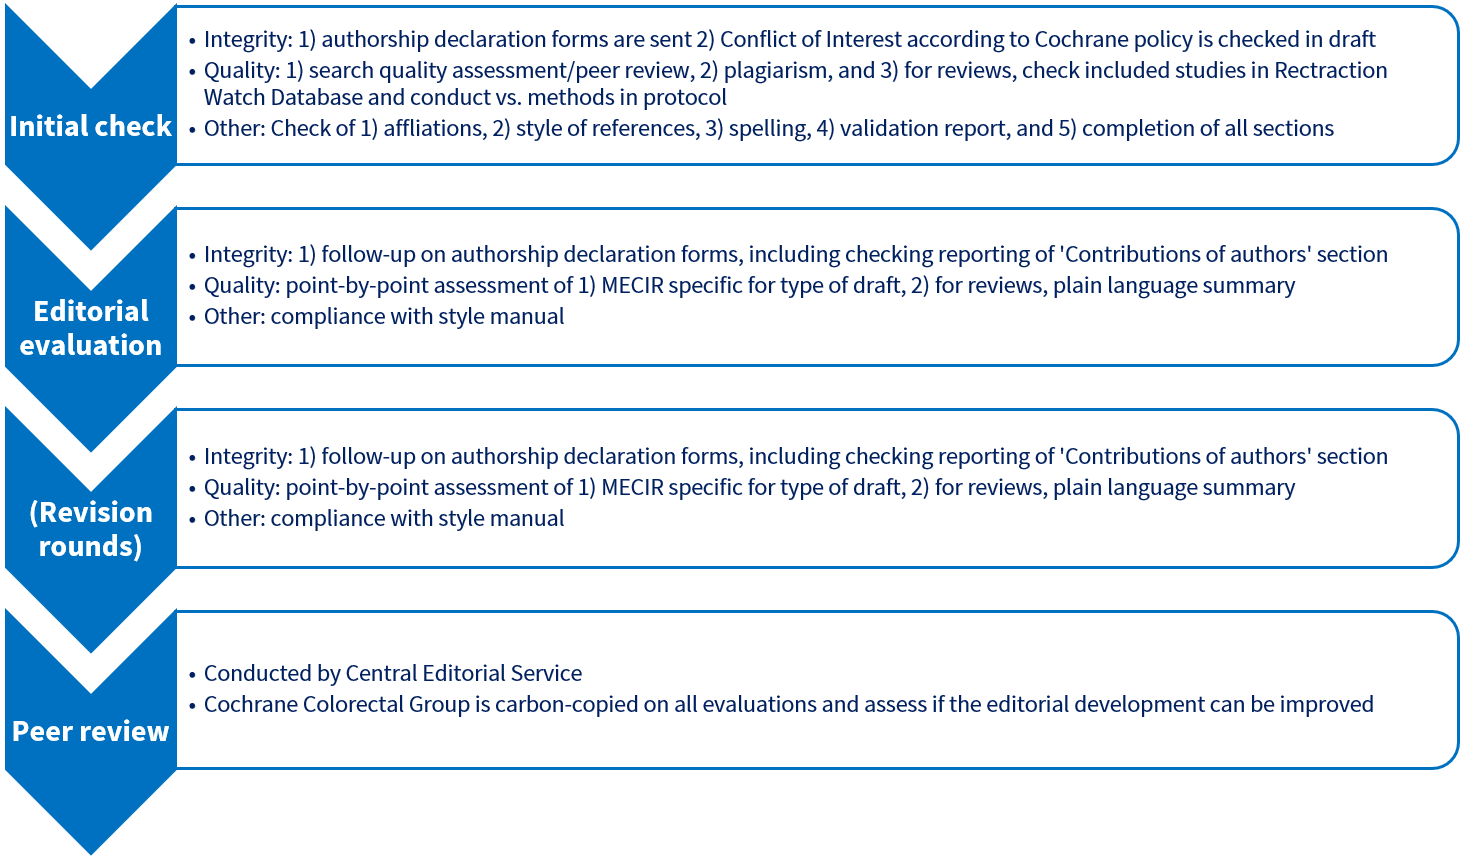 Overview of the standardised development of drafts at Cochrane Colorectal Group that ensures the integrity and quality of drafts. MECIR: Methodological Expectations of Cochrane Intervention Reviews.